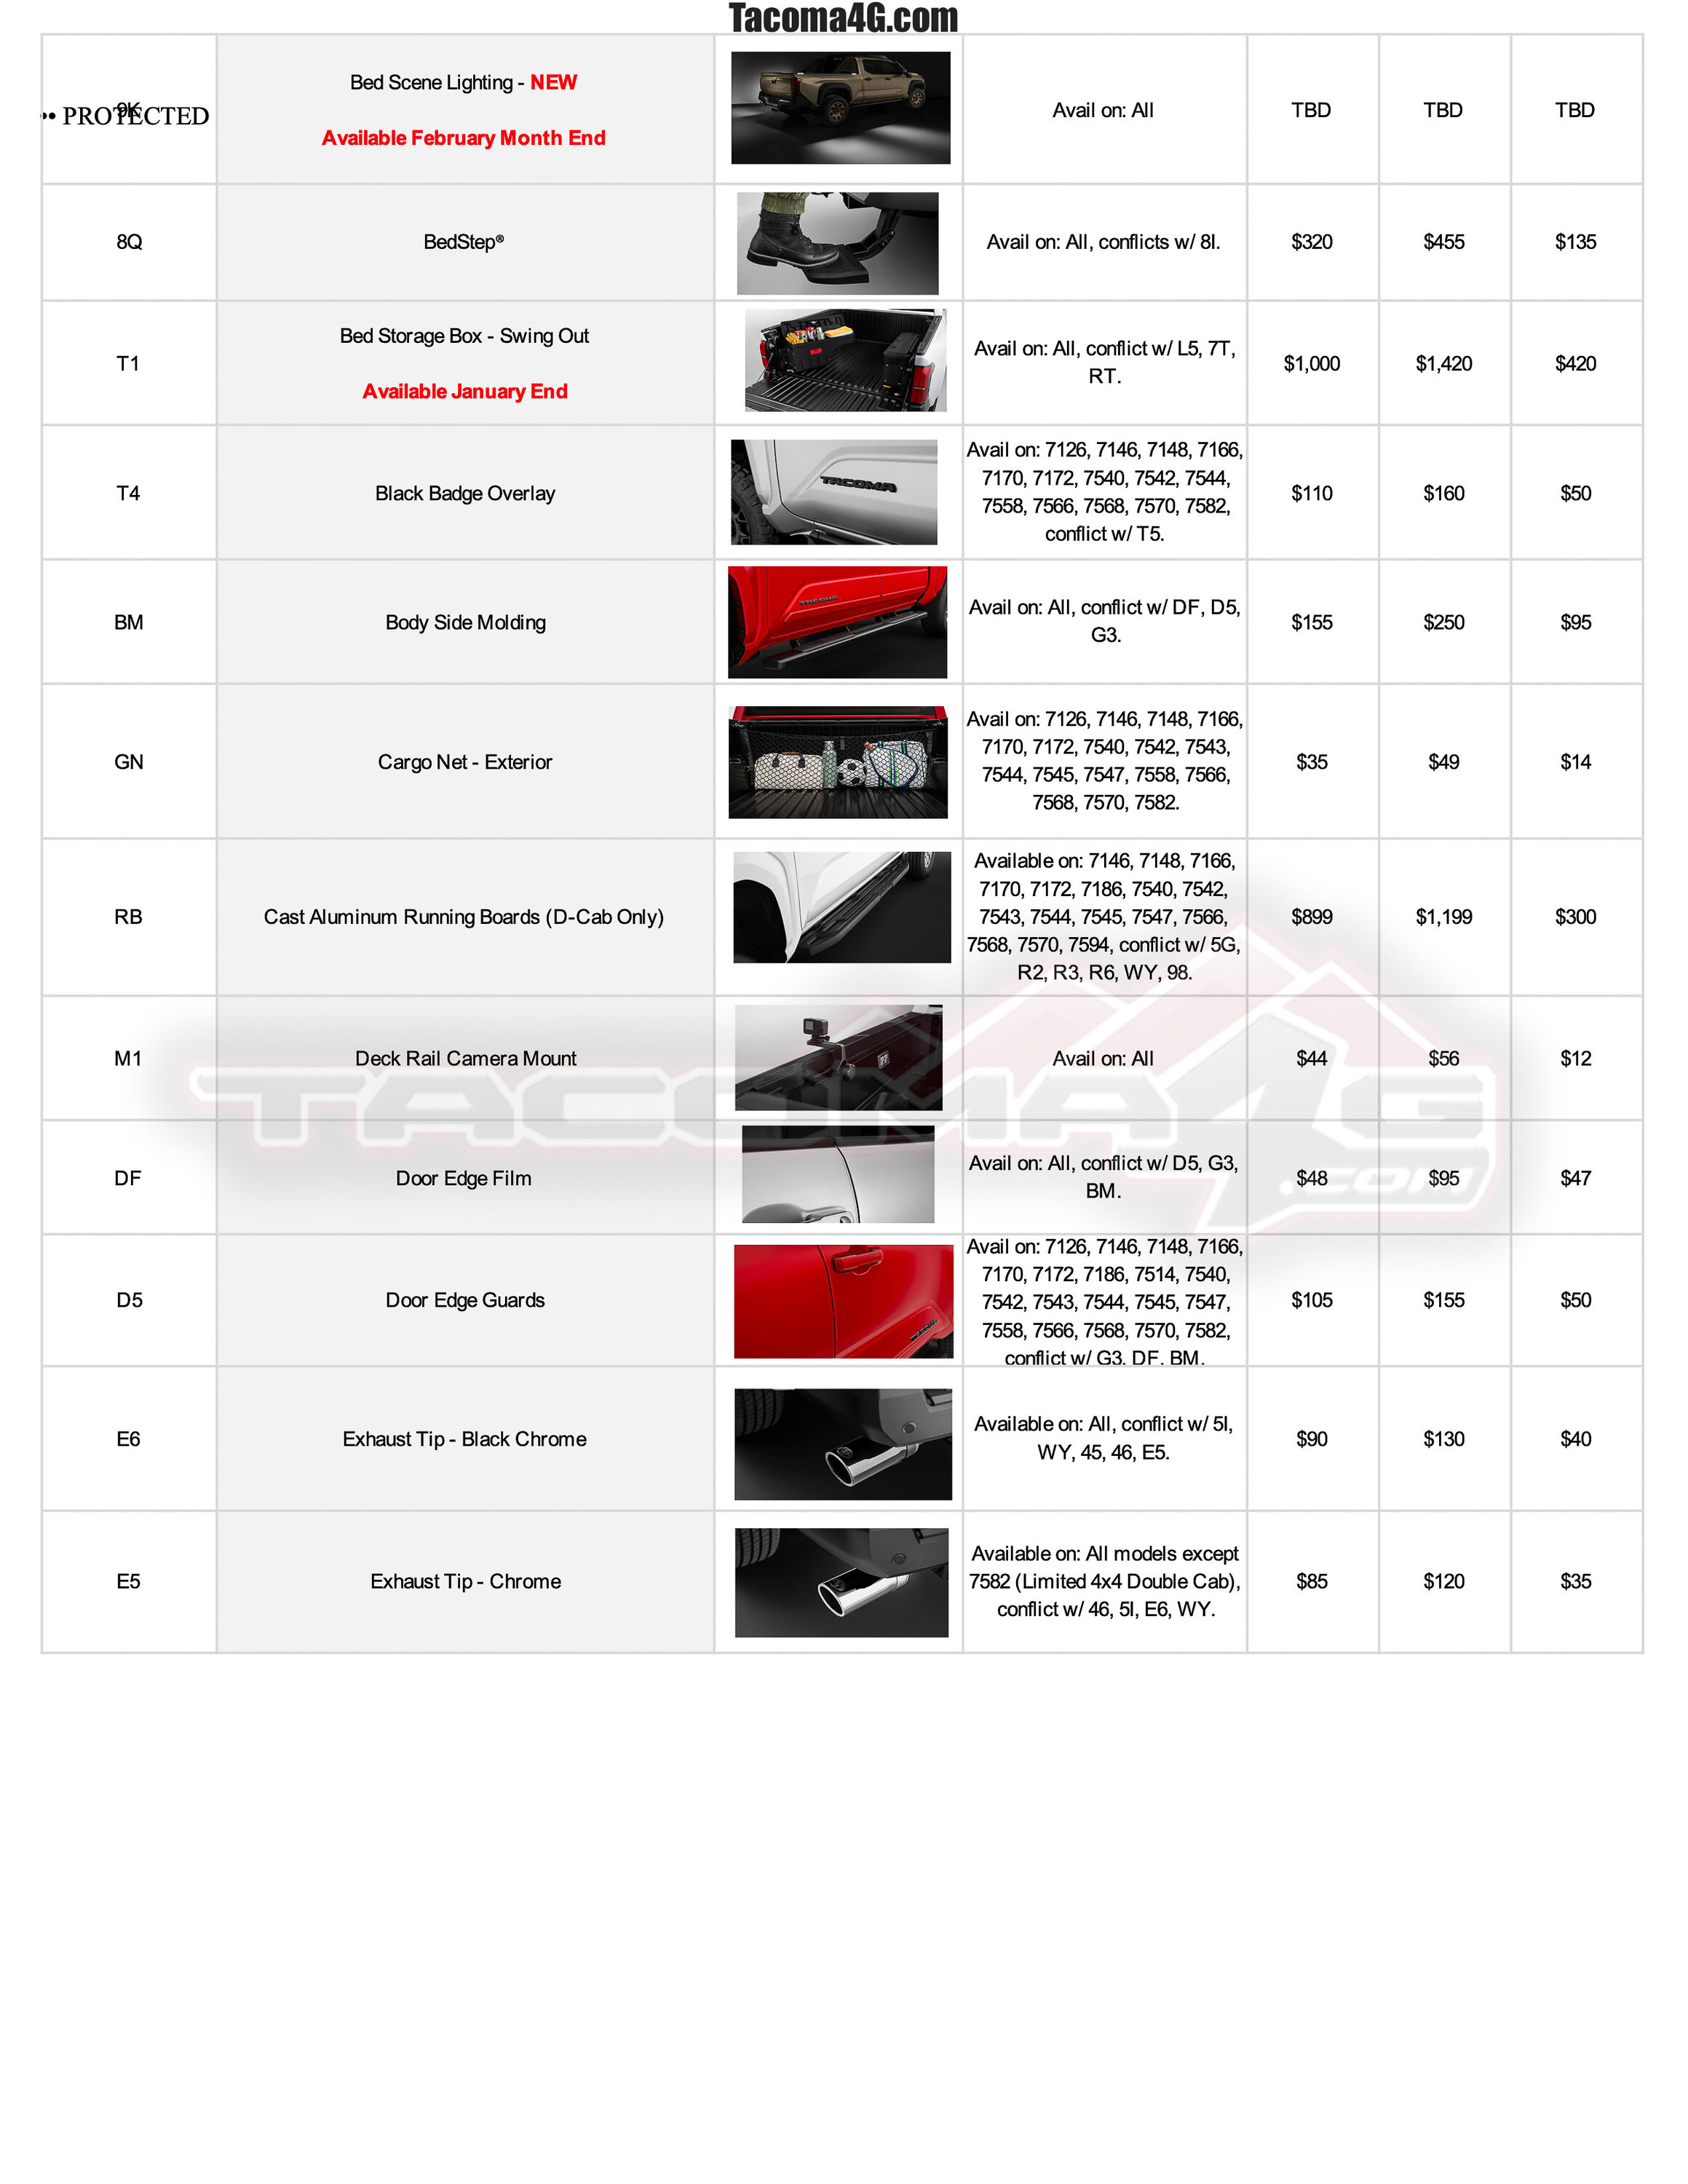 2024 Tacoma 2024 Tacoma Post-Production Options (PPO) Guide - OEM / TRD Accessories Parts + Pricing!  [UPDATED 5-7-24] 2024 Tacoma PPO Accessories Guide_02.09.24-2